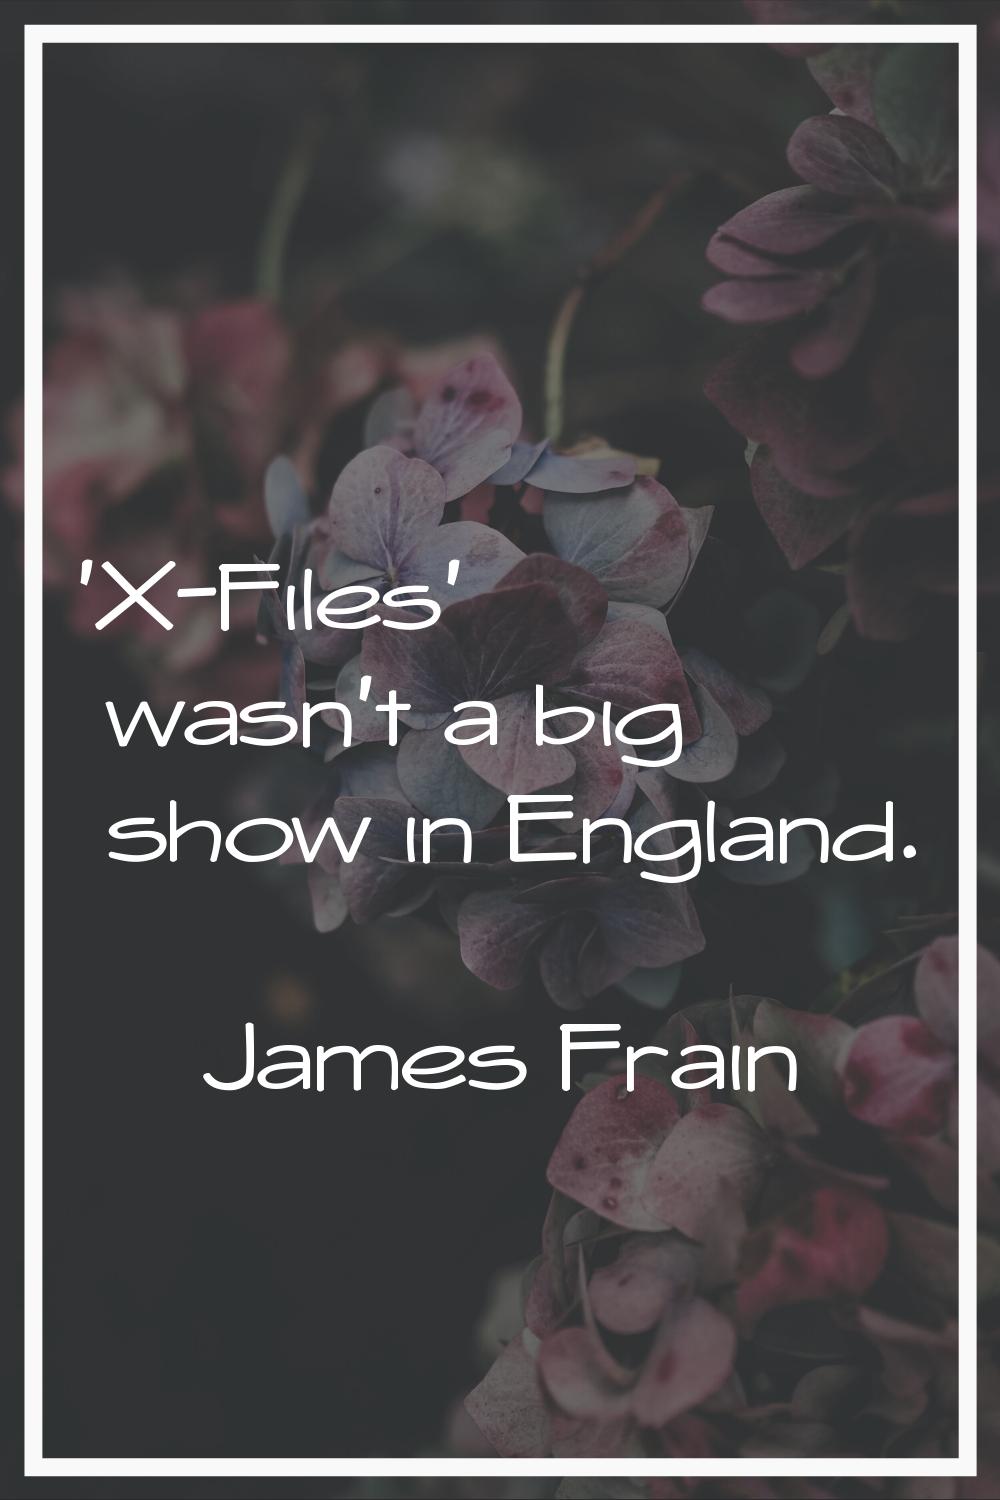 'X-Files' wasn't a big show in England.